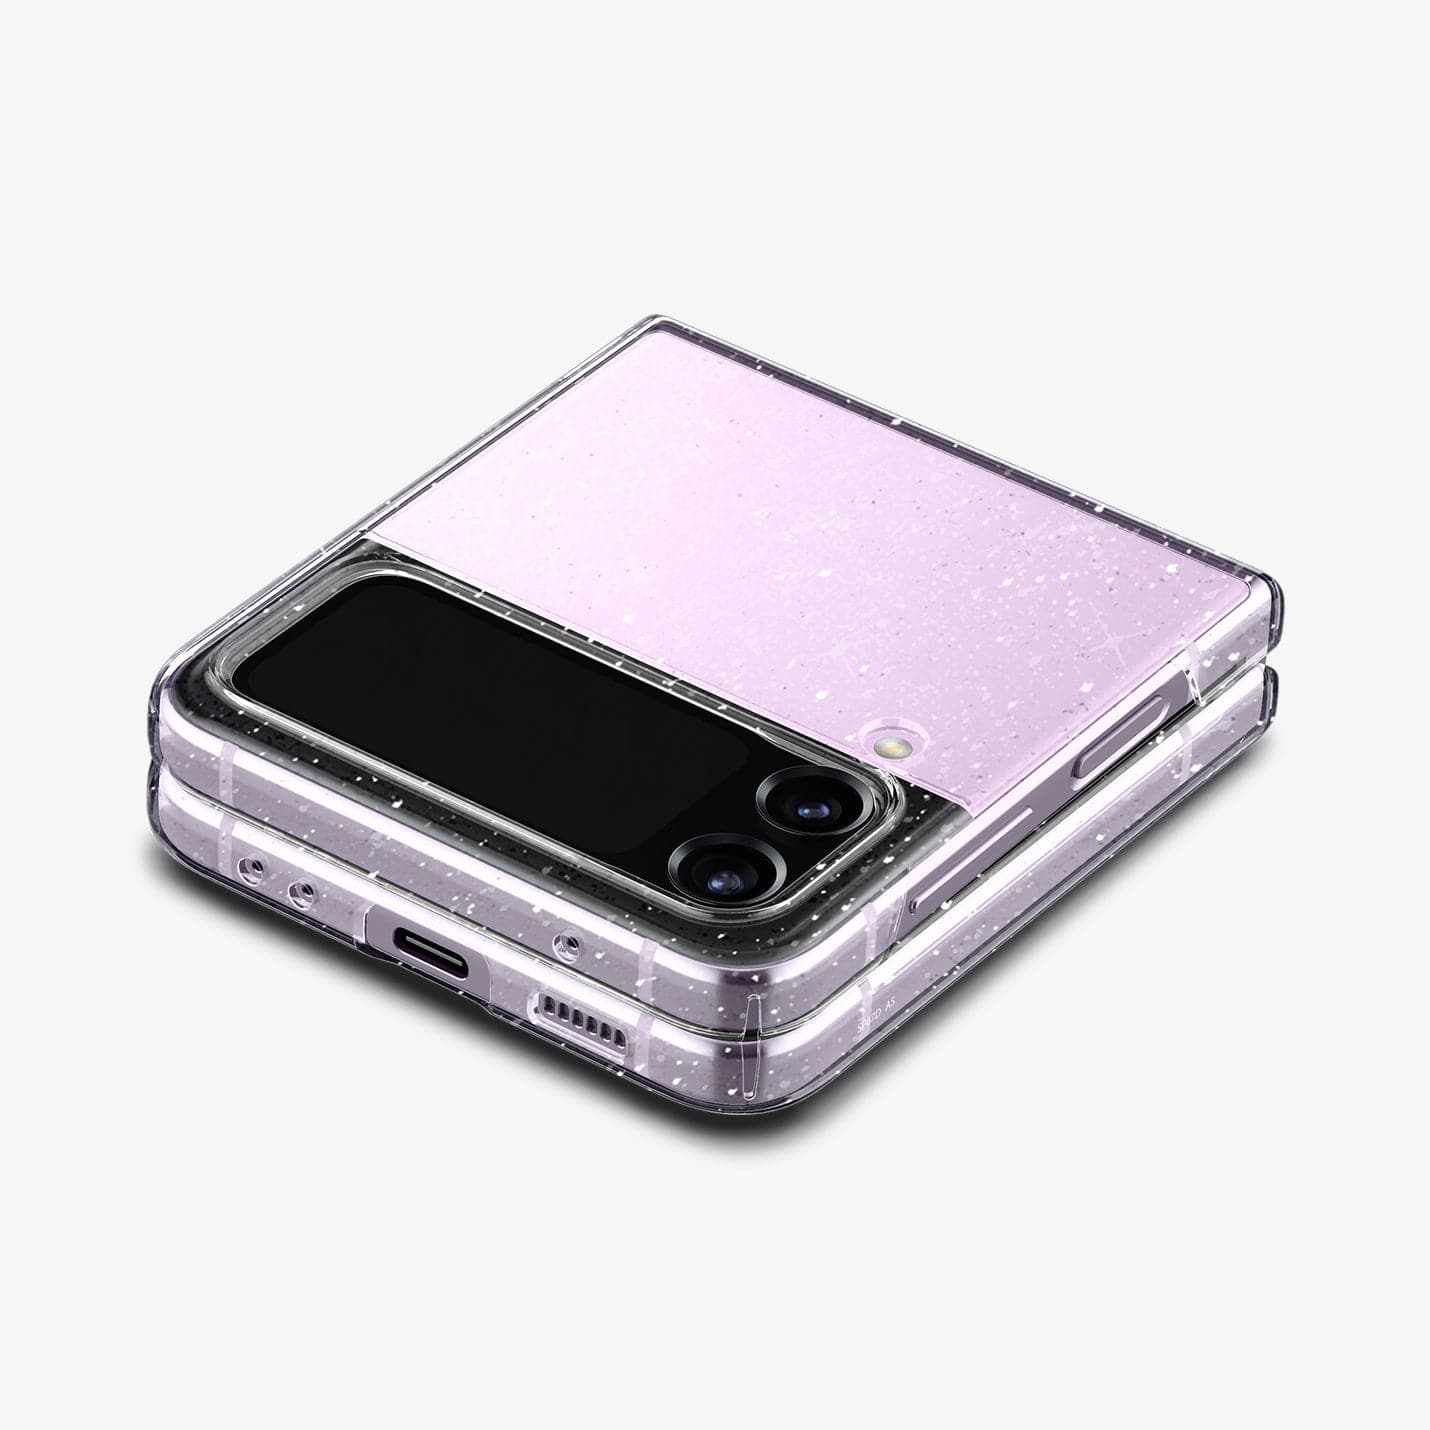 ACS05113 - Galaxy Z Flip 4 Case Air Skin Glitter in crystal quartz showing the back with camera lens, side and bottom with device folded